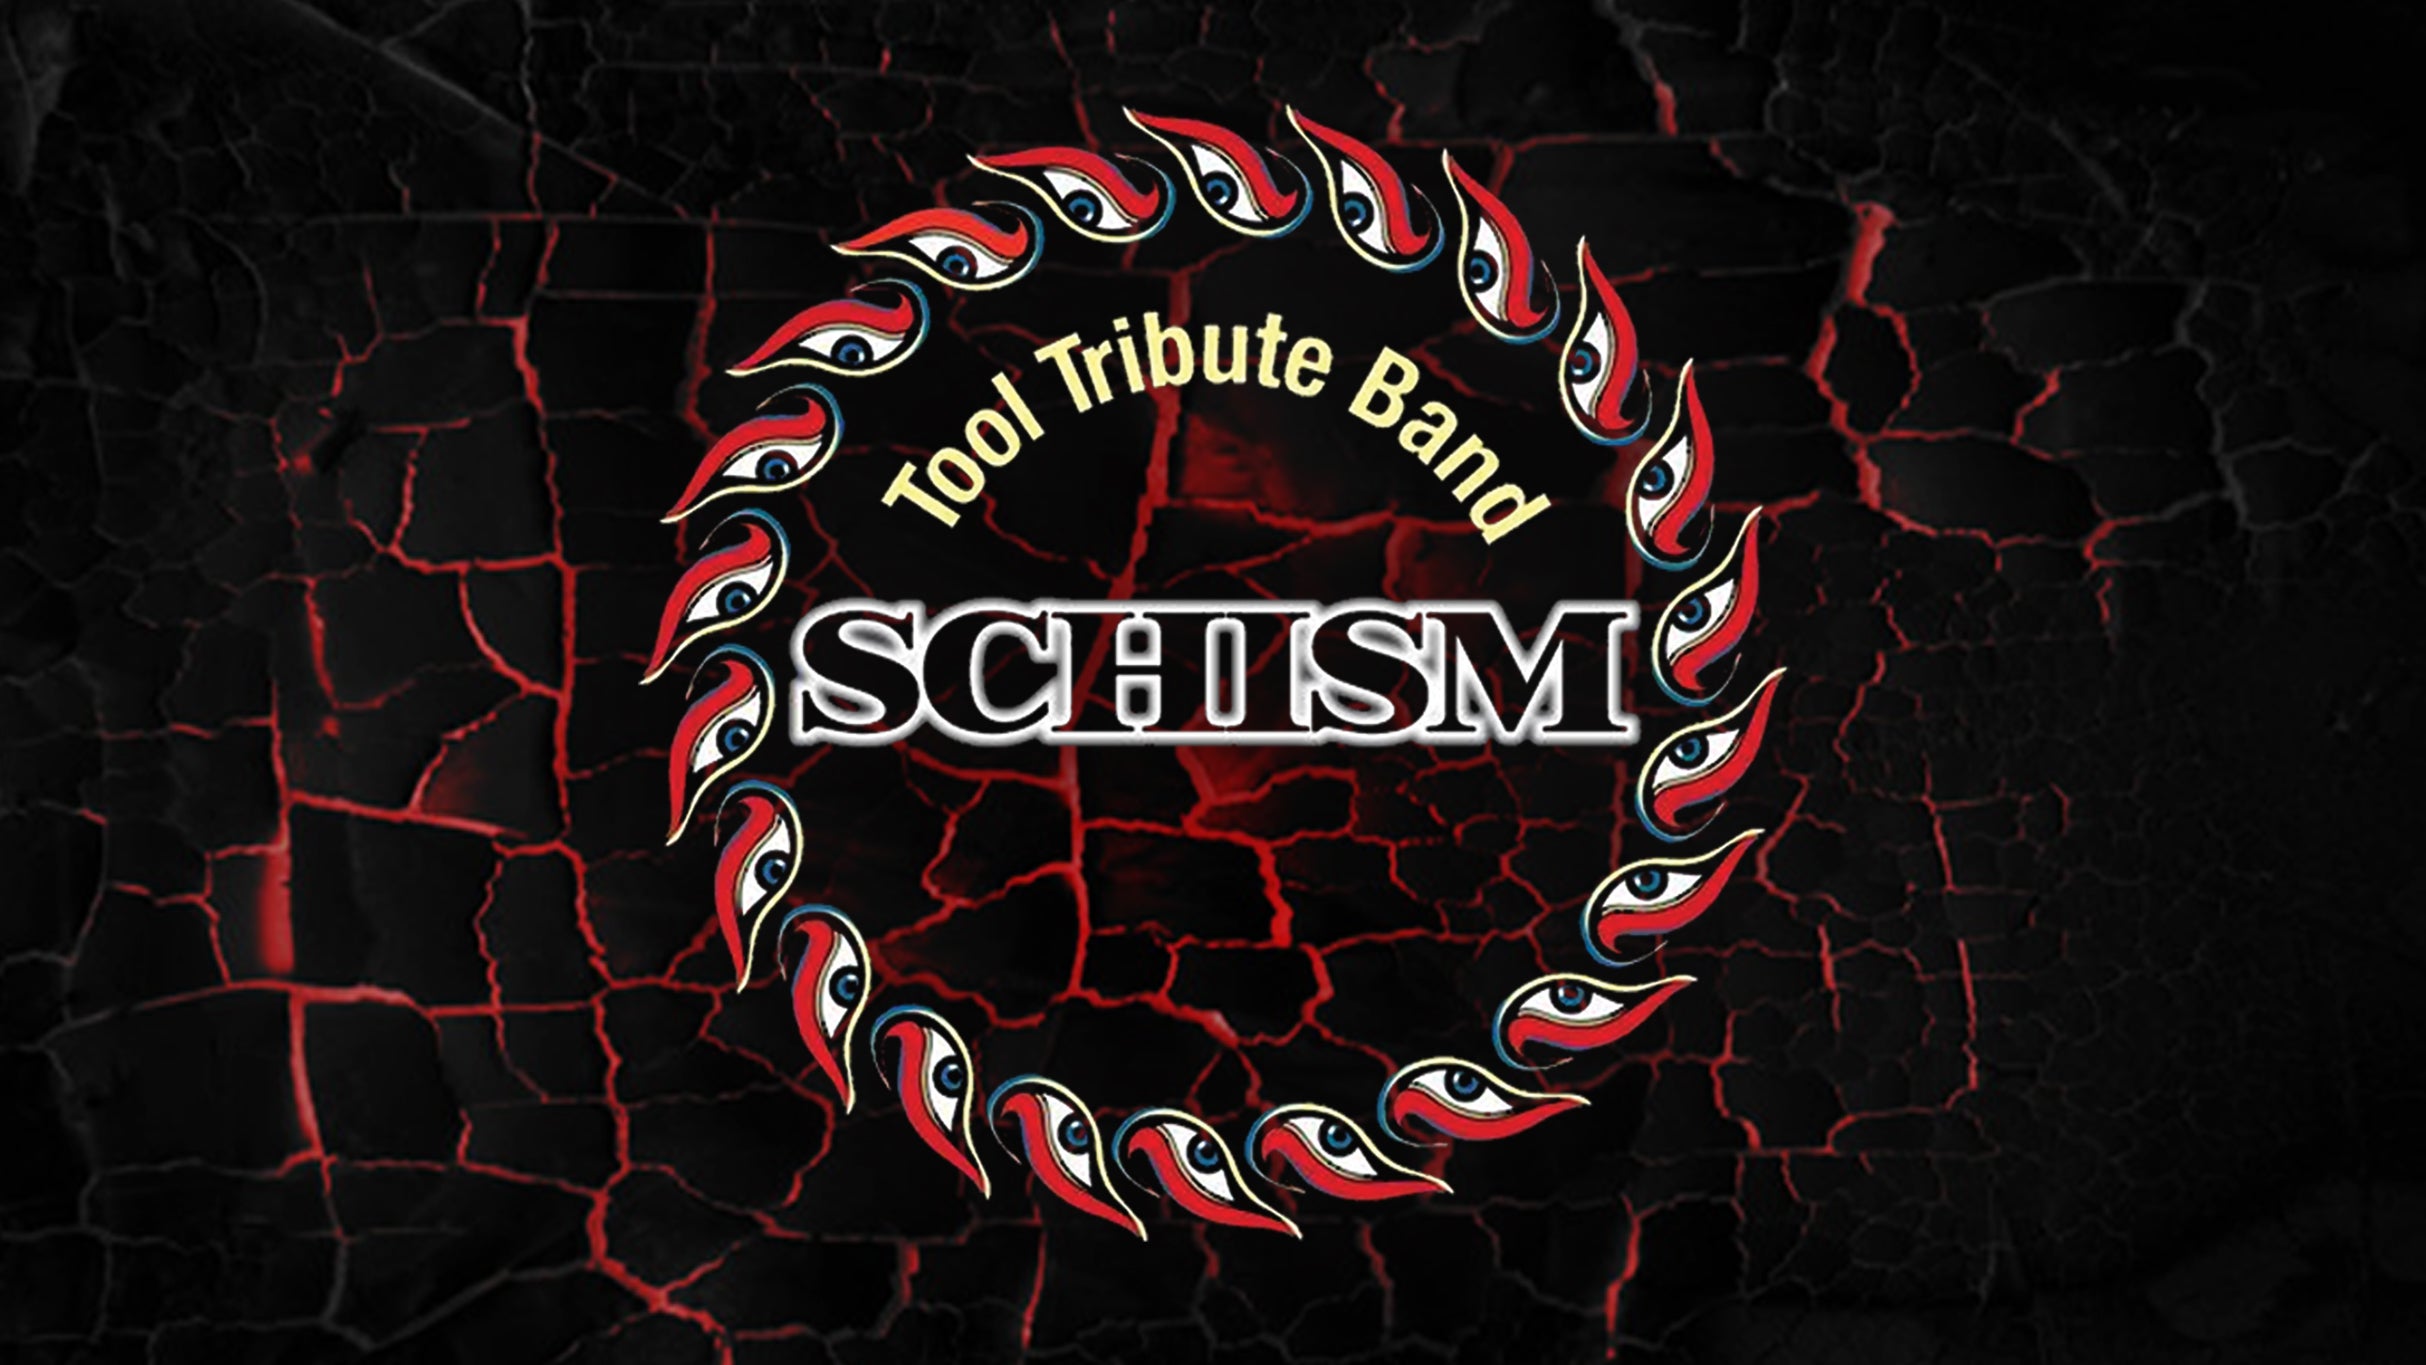 Schism (A Tribute To Tool) at Flour City Station